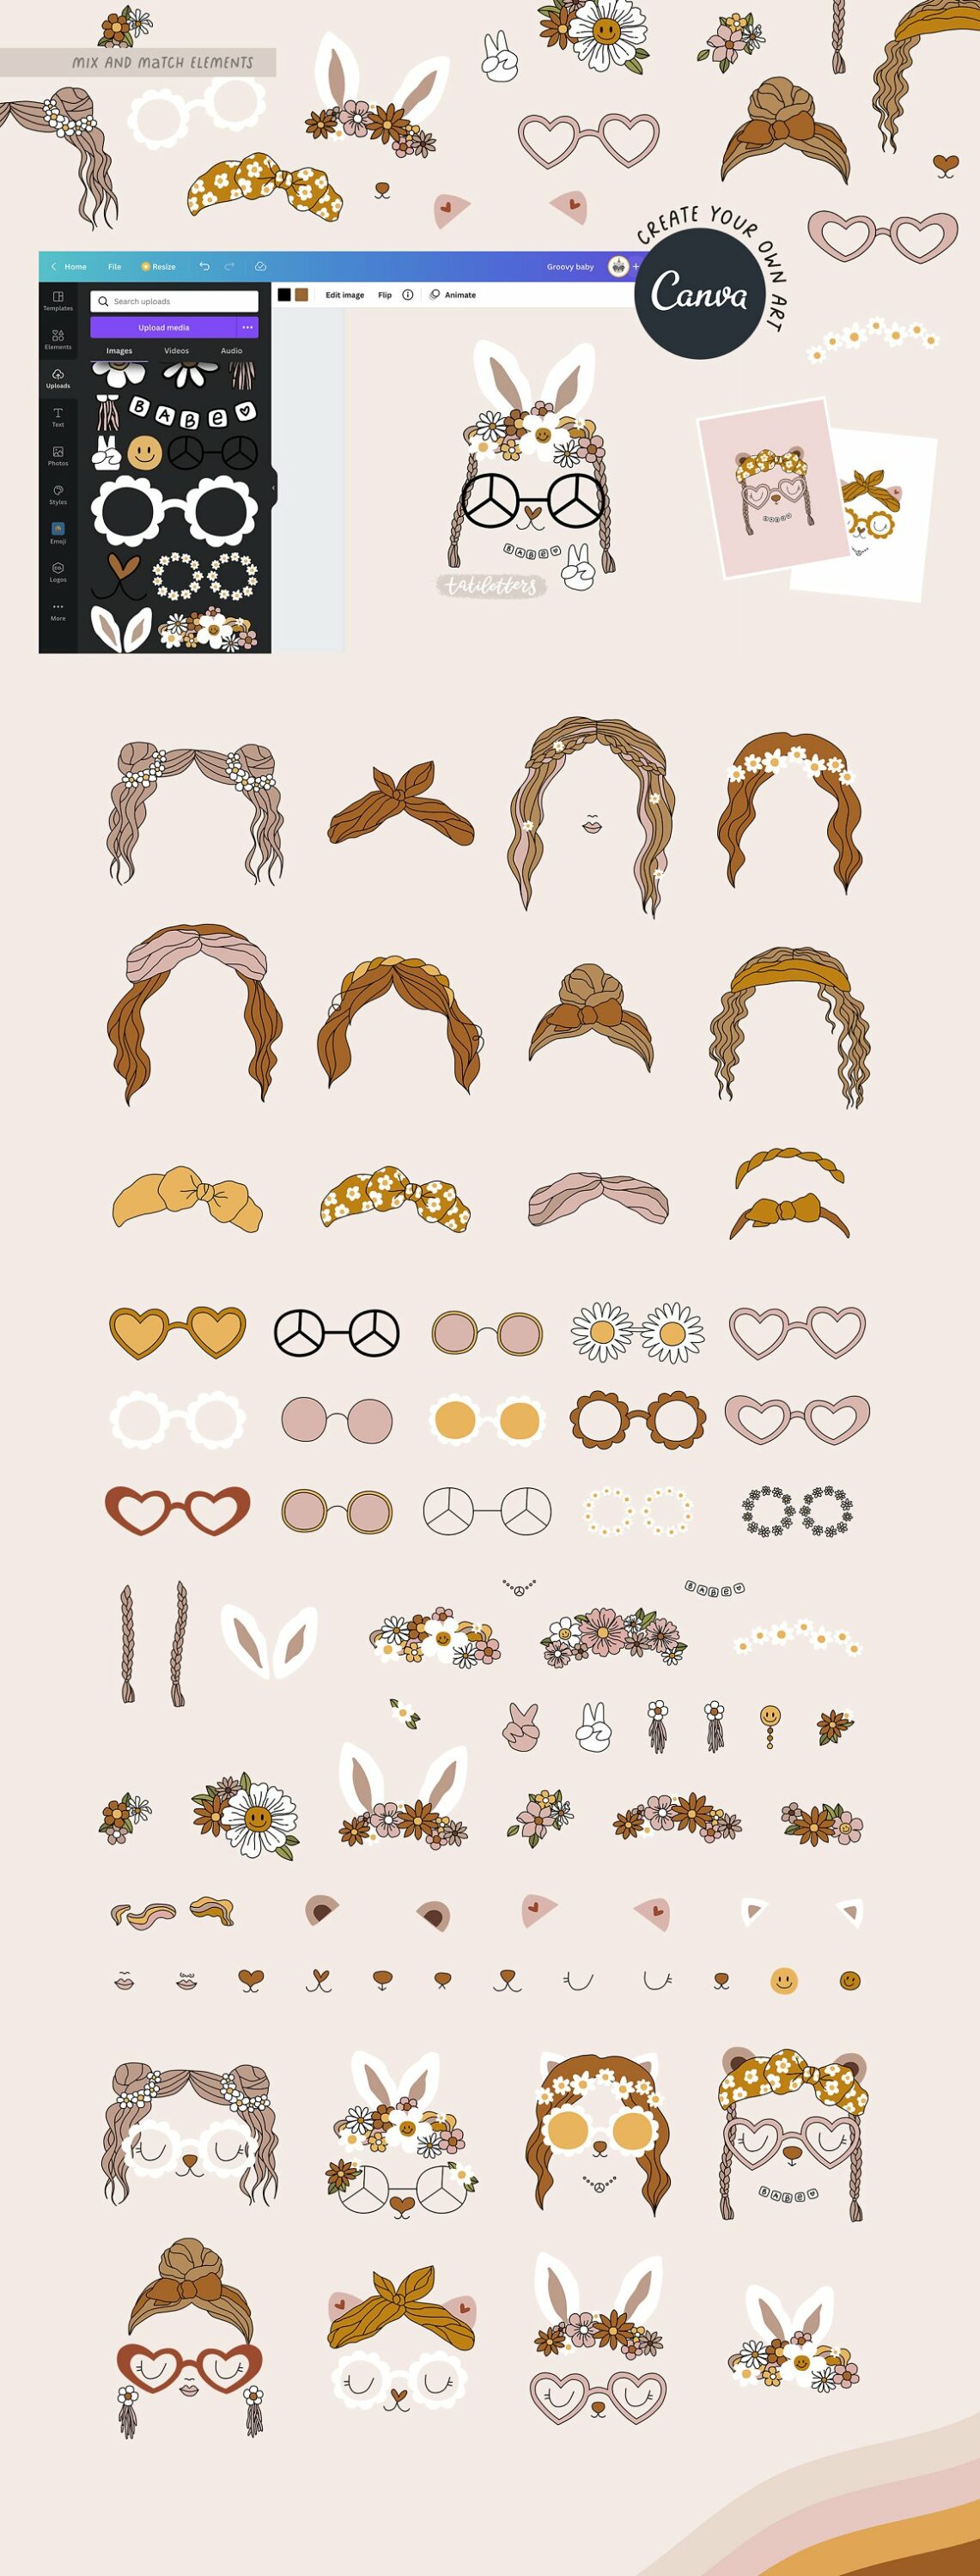 Hairstyles, glasses and more.